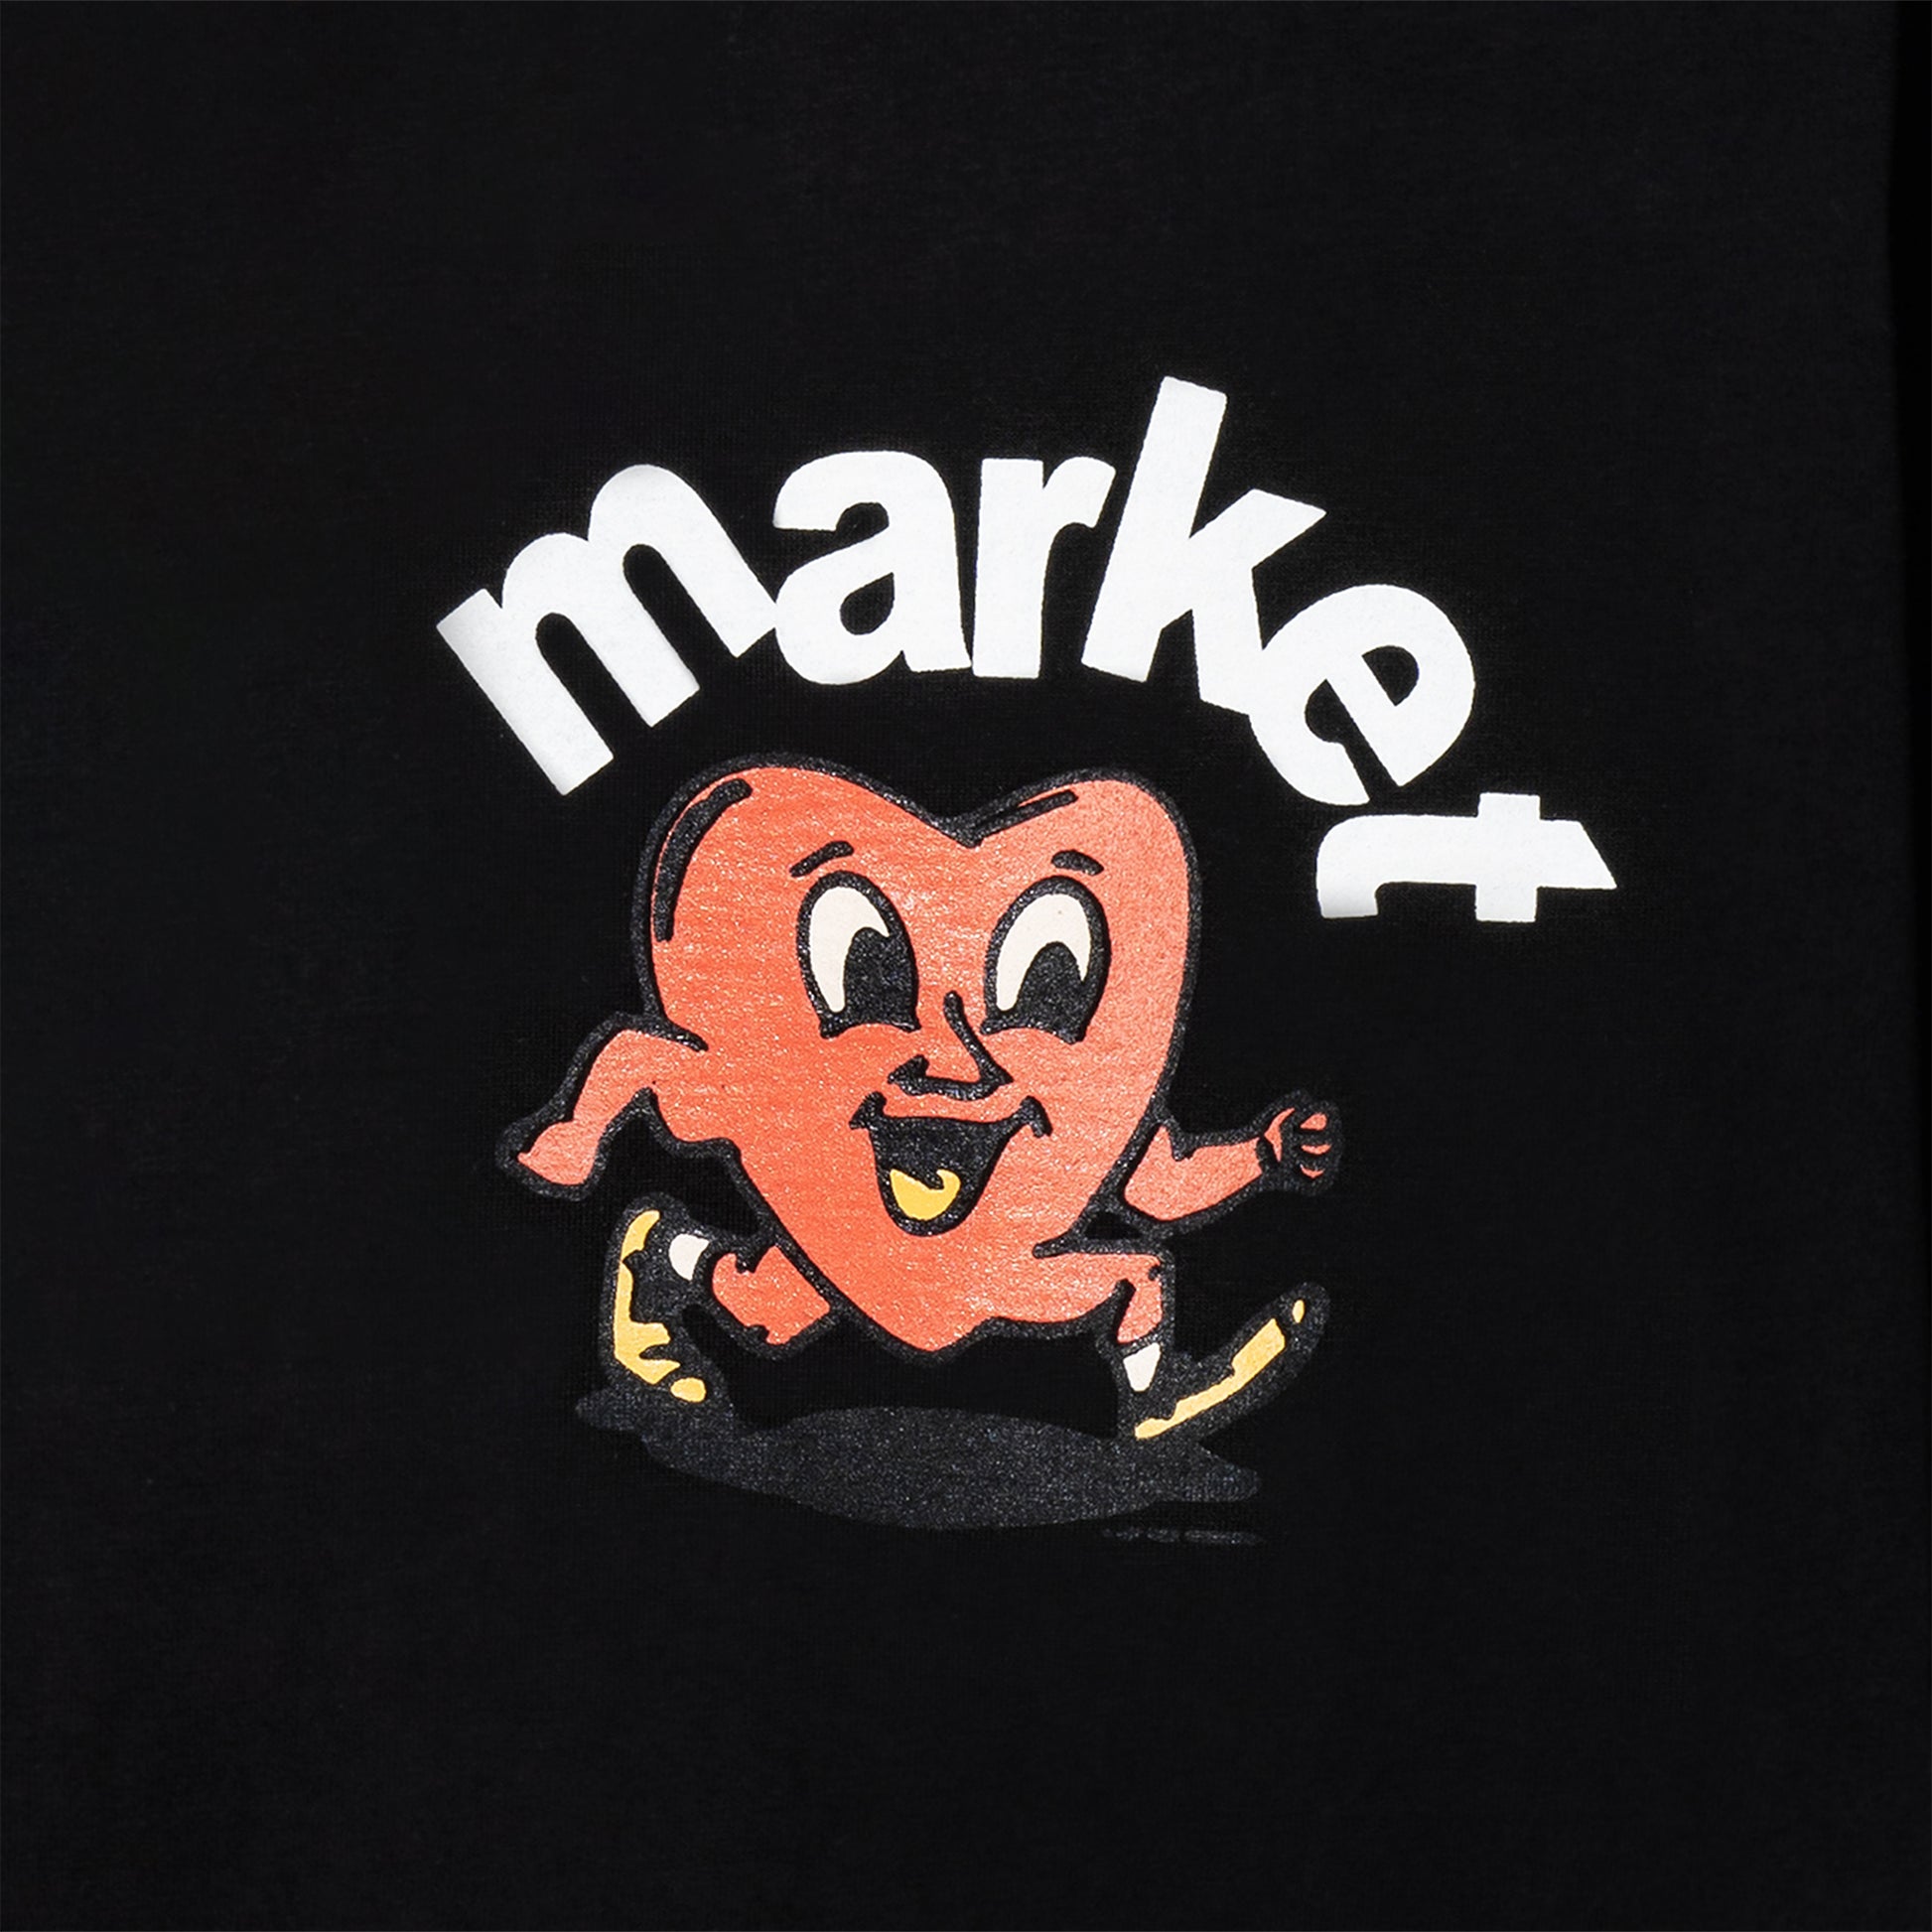 MARKET clothing brand FRAGILE T-SHIRT. Find more graphic tees, hats, hoodies and more at MarketStudios.com. Formally Chinatown Market.